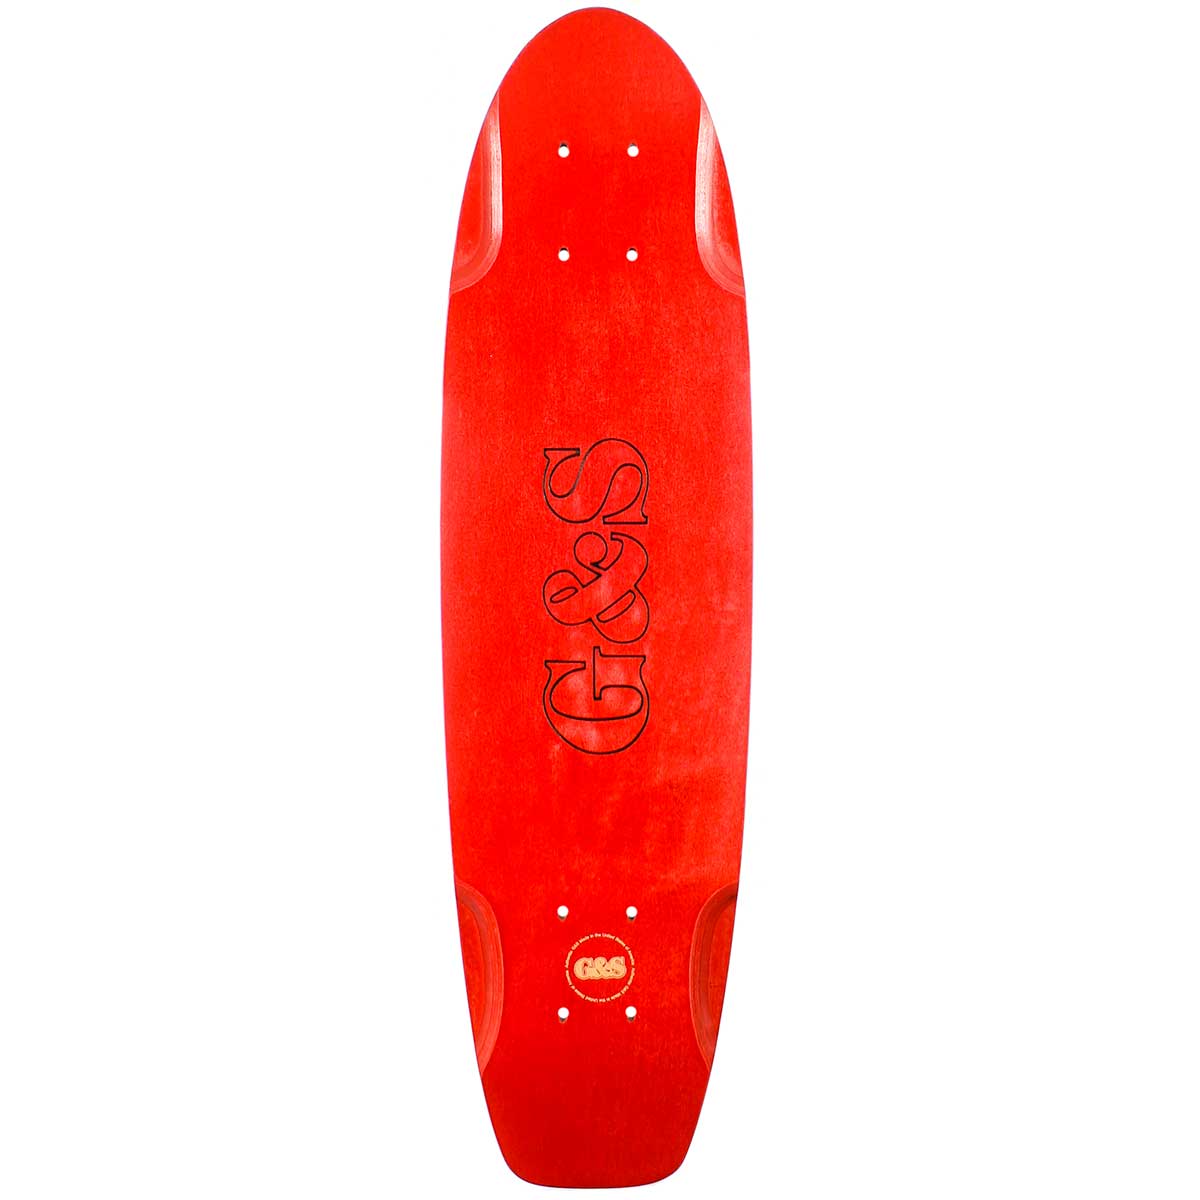 7.375x29 G&S KT-4 Squaretail Re-Issue Deck - Red Pre-Gripped